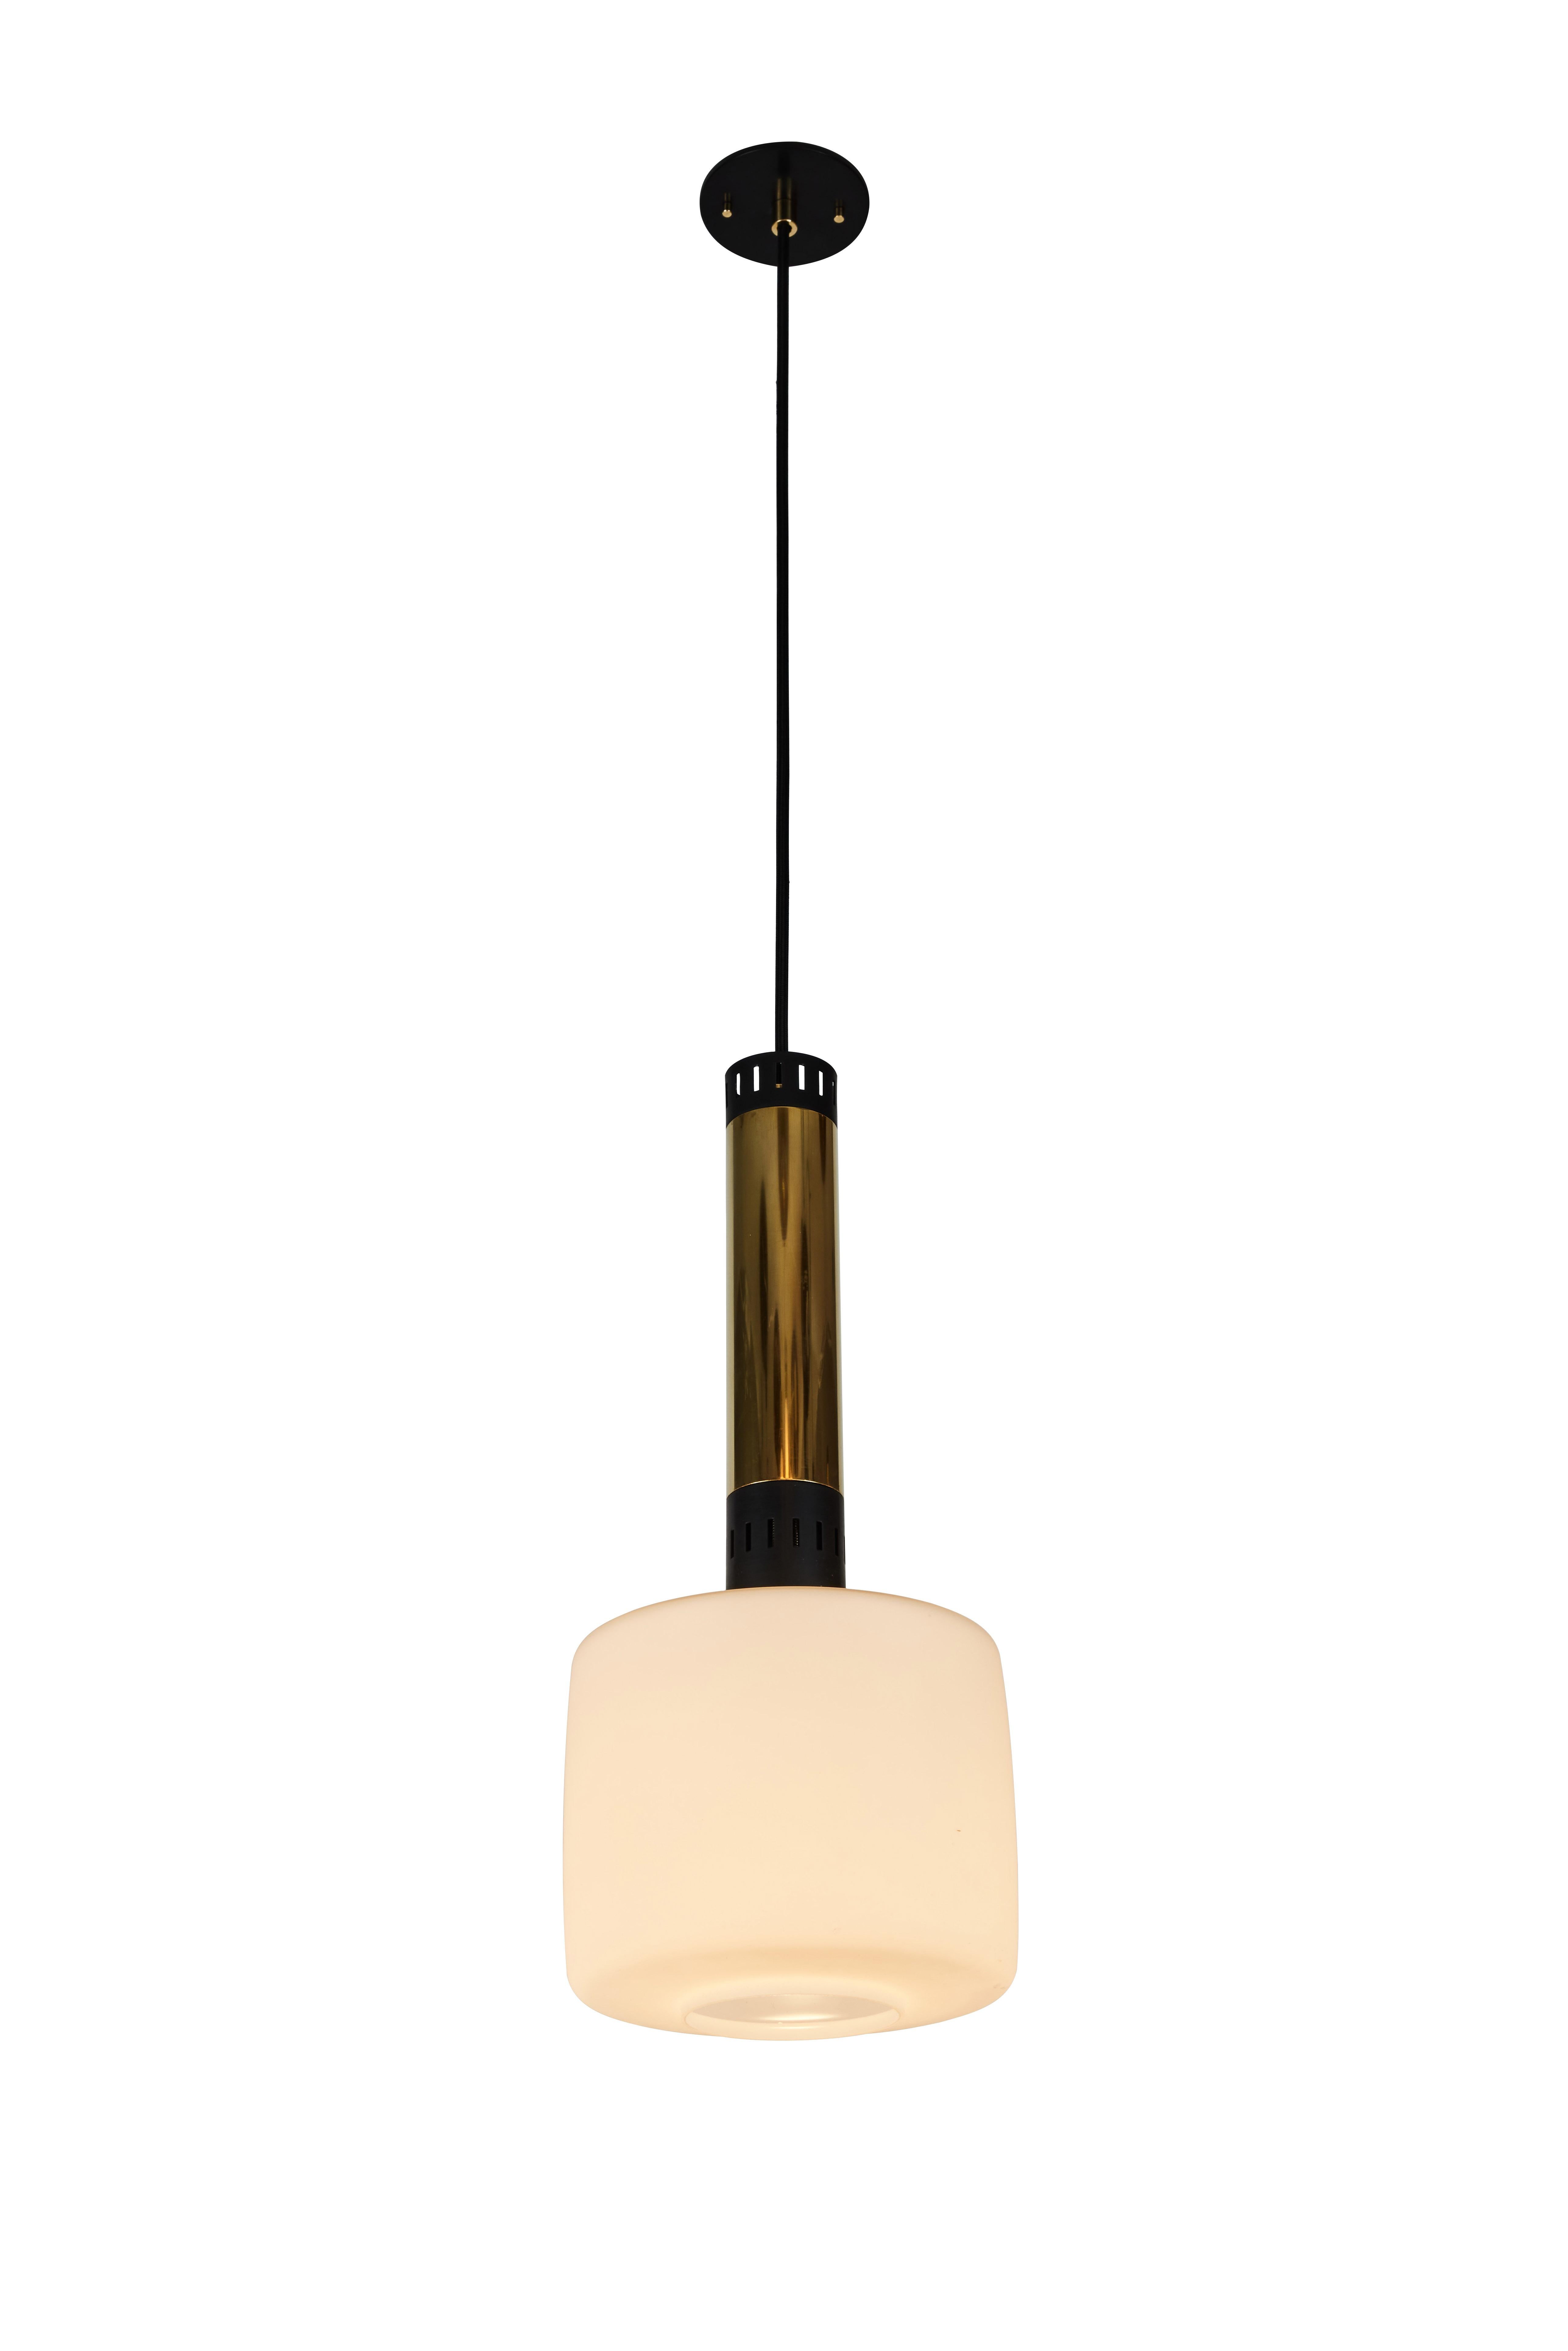 Pair of large 1950s Stilnovo glass and brass pendants. A quintessentially 1950s Italian design executed in matte finish opaline glass and polished brass with a custom fabricated architectural ceiling canopy for mounting over a standard American